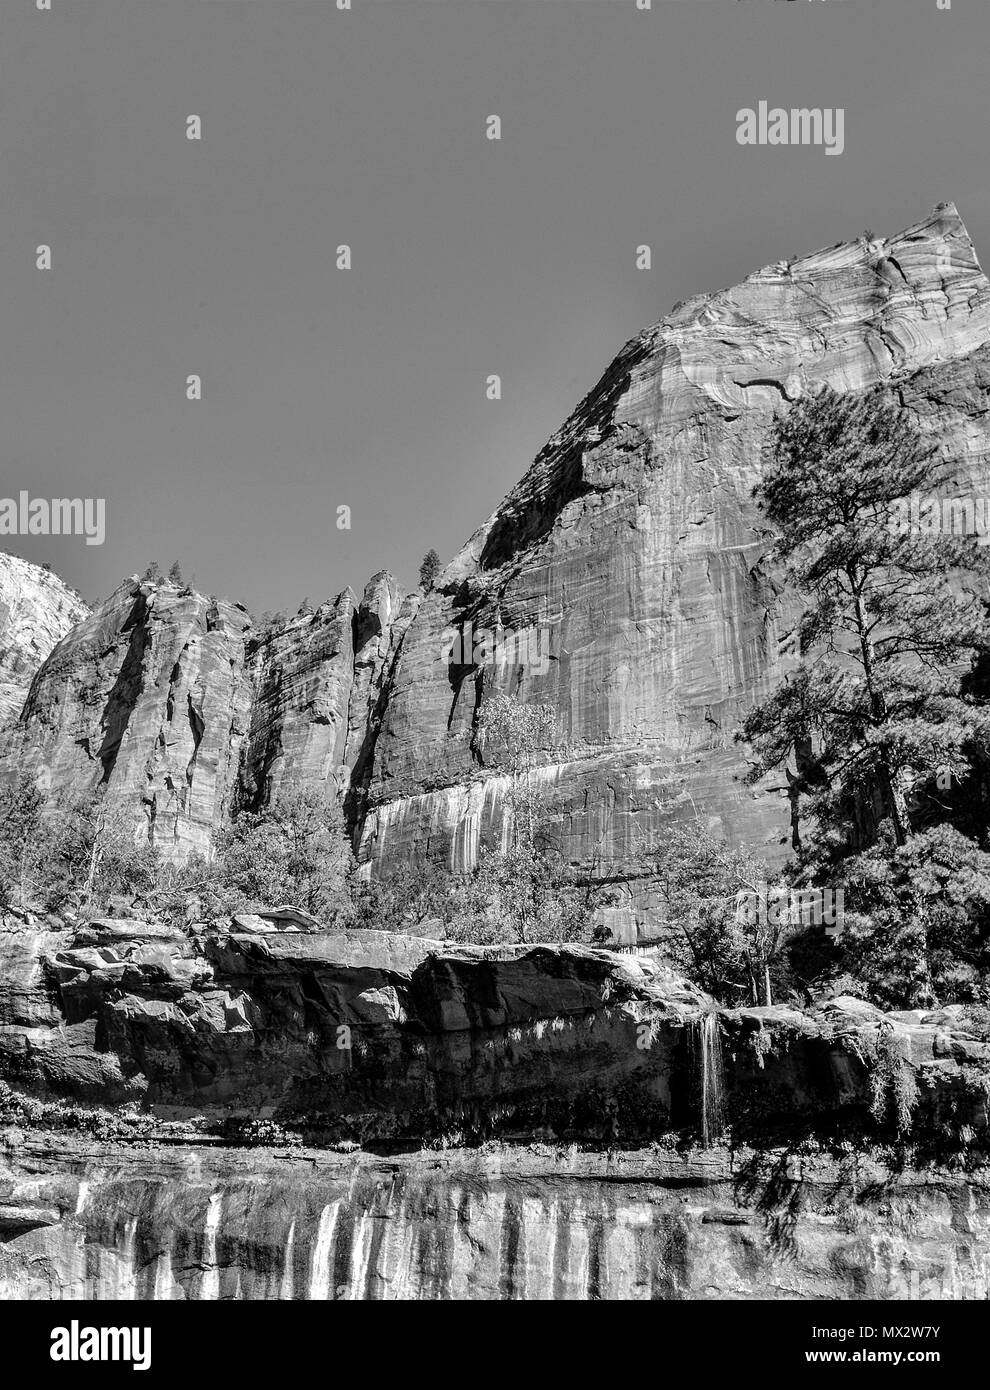 Large rock mountain under clear sky with tall trees and valley. Black and white. Stock Photo